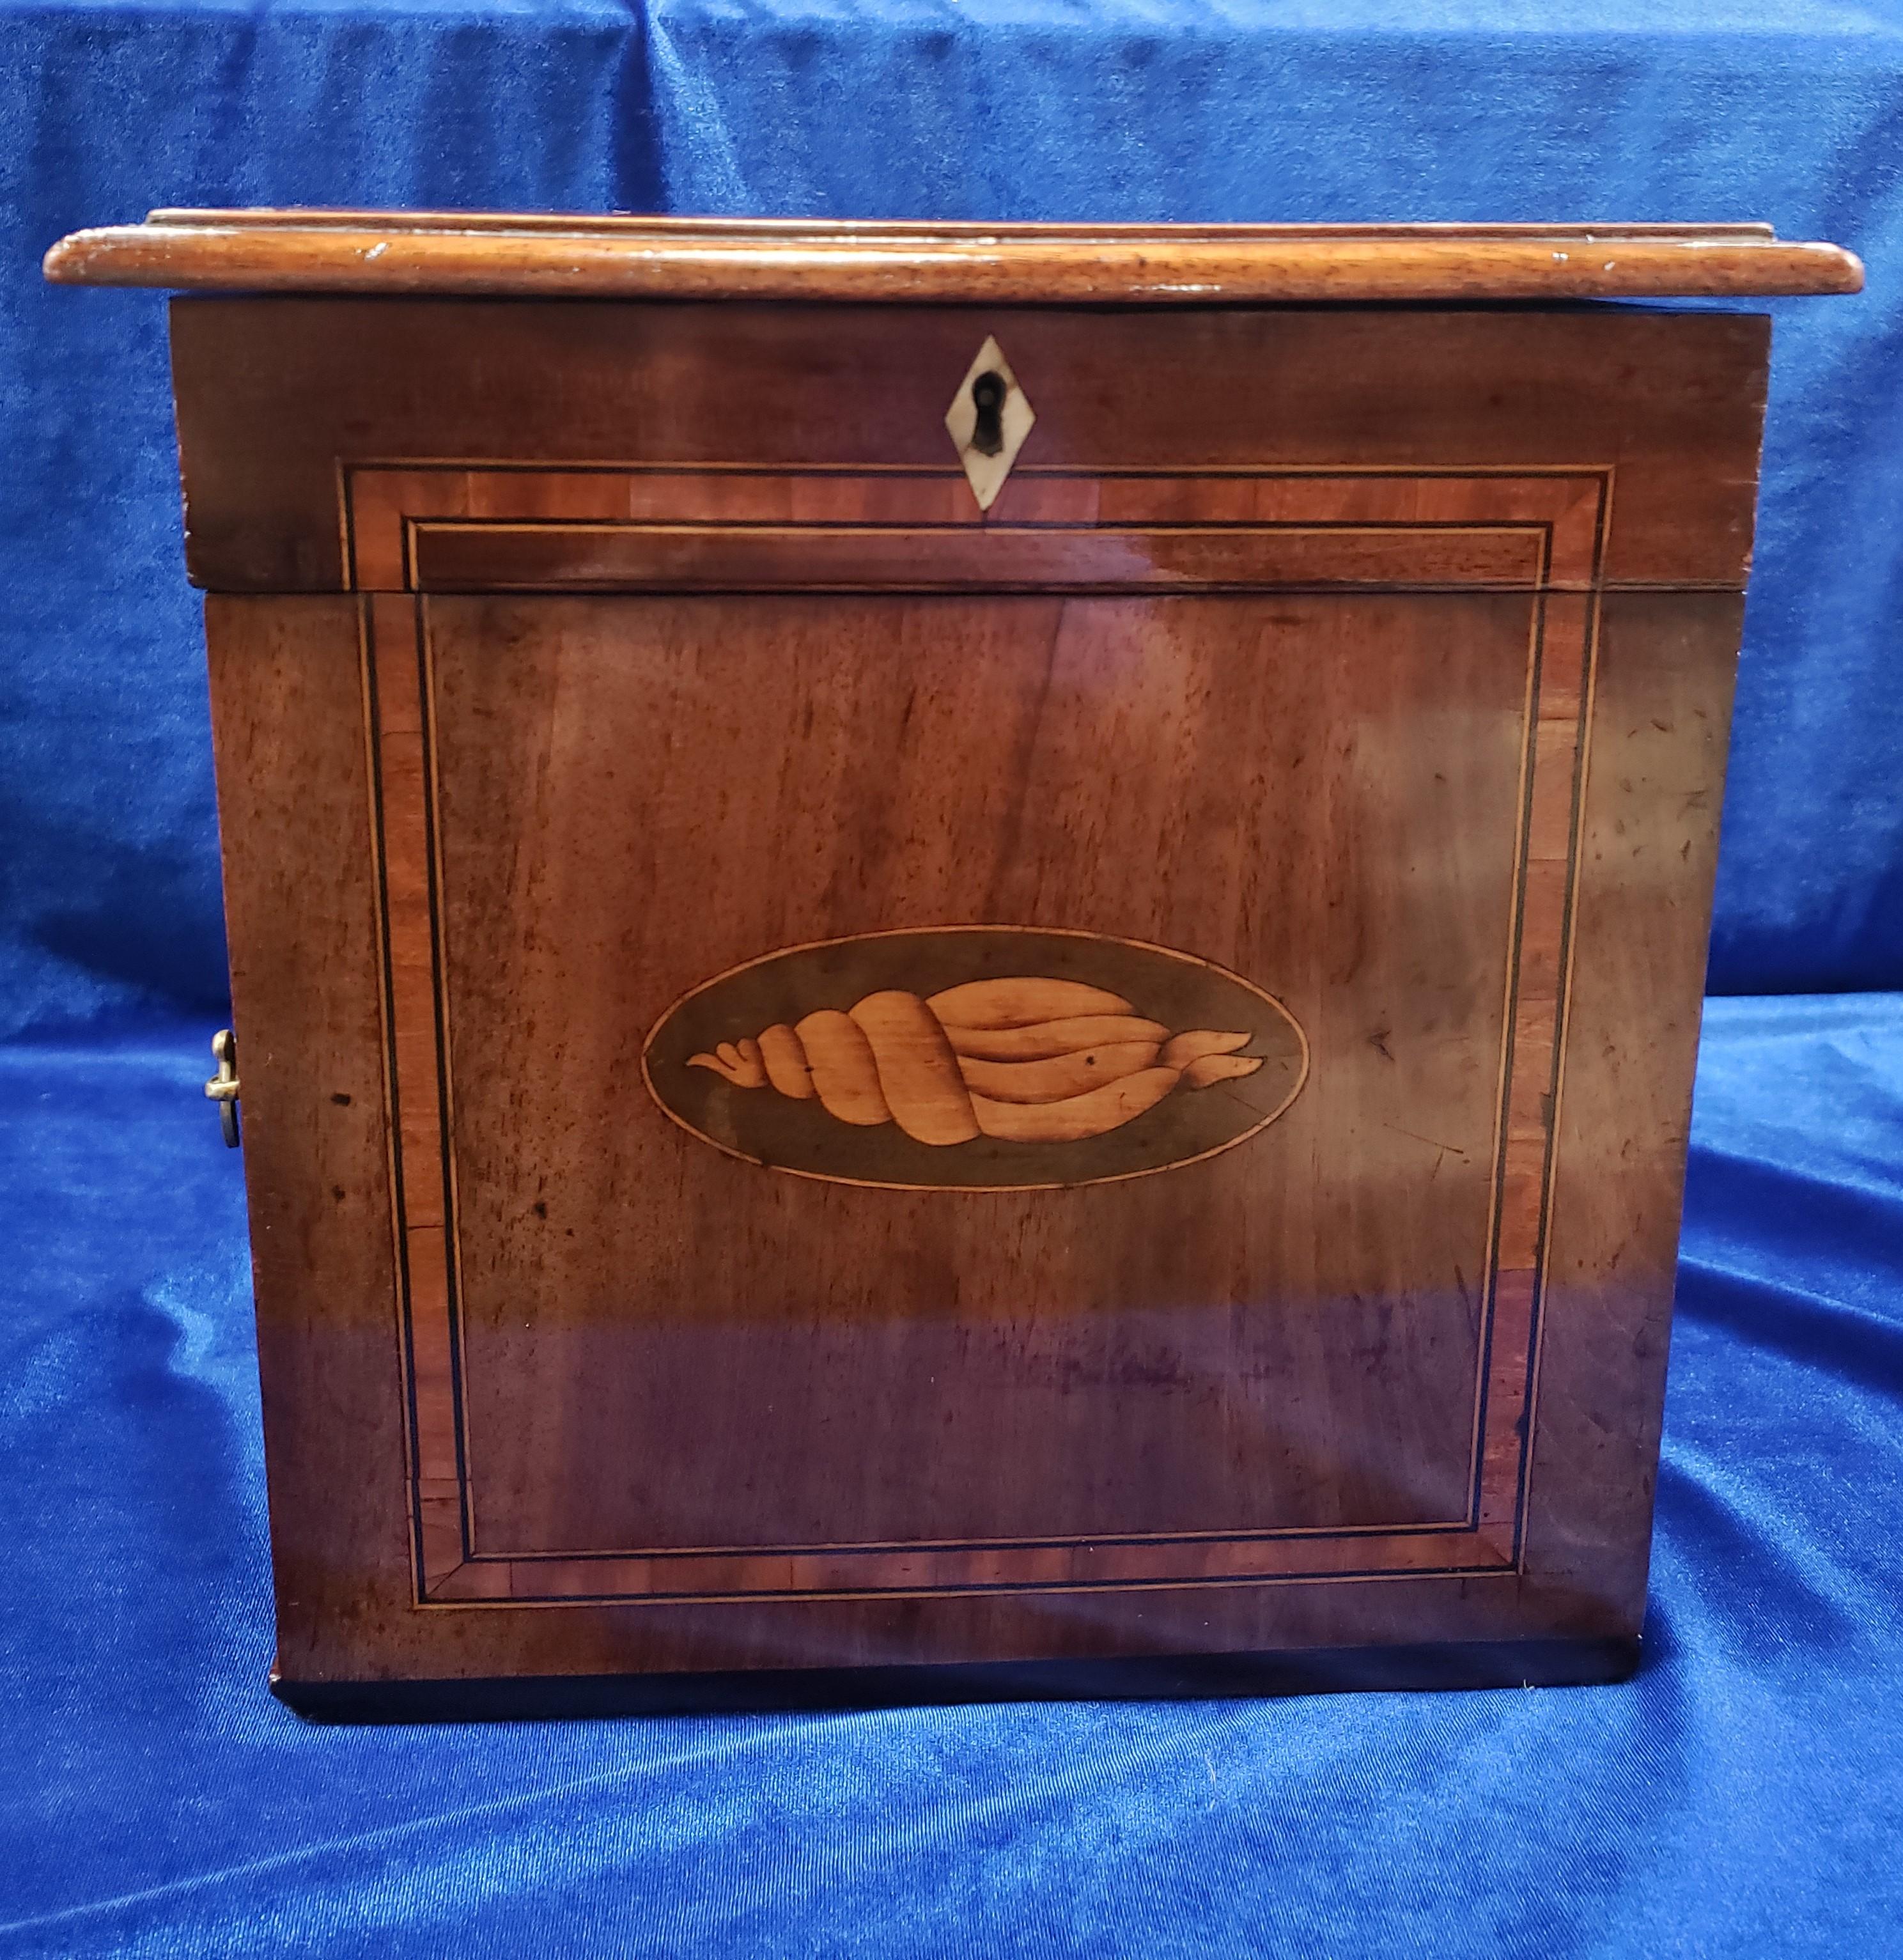 Regency mahogany apothecary cabinet with satin wood shell inlay and crossbanding. The front opens to reveal 3 cubby holes and 4 drawers. The back opens to show 5 small cubby holes and 3 larger cubbies. The top reveals 4 deep slots for bottles and